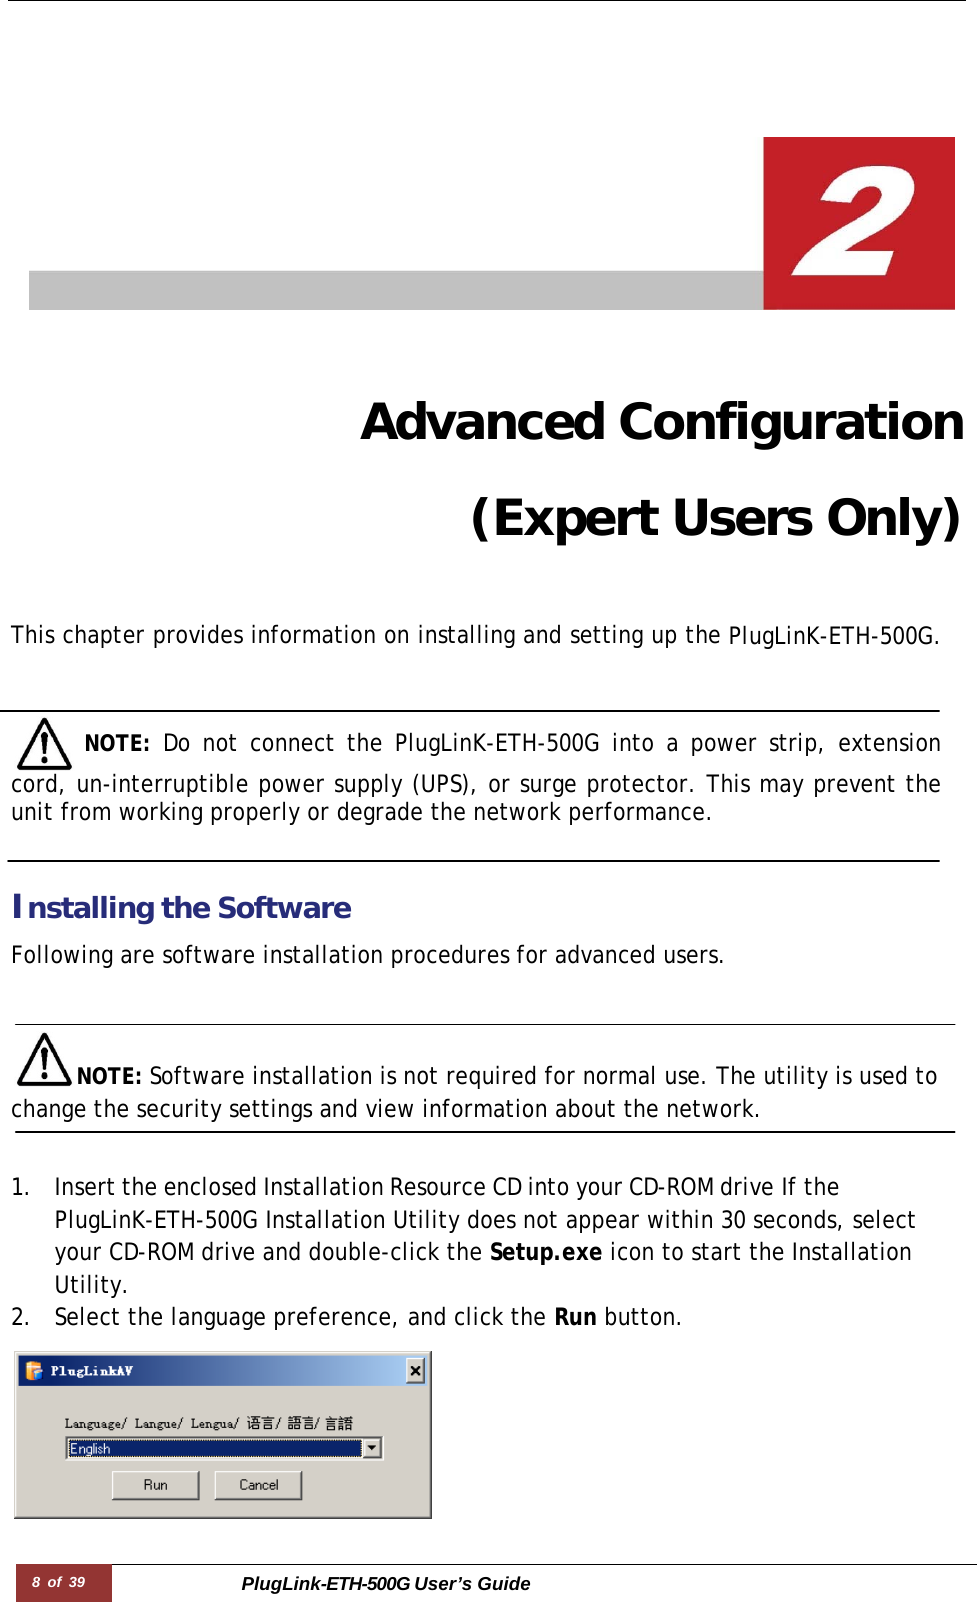 8 of 39 PlugLink-ETH-500G User’s Guide      Advanced Configuration (Expert Users Only)   This chapter provides information on installing and setting up the PlugLinK-ETH-500G.      NOTE:  Do not connect the PlugLinK-ETH-500G into a power strip, extension cord, un-interruptible power supply (UPS), or surge protector. This may prevent the unit from working properly or degrade the network performance.    Installing the Software  Following are software installation procedures for advanced users.    NOTE: Software installation is not required for normal use. The utility is used to change the security settings and view information about the network.   1. Insert the enclosed Installation Resource CD into your CD-ROM drive If the PlugLinK-ETH-500G Installation Utility does not appear within 30 seconds, select your CD-ROM drive and double-click the Setup.exe icon to start the Installation Utility. 2. Select the language preference, and click the Run button.  